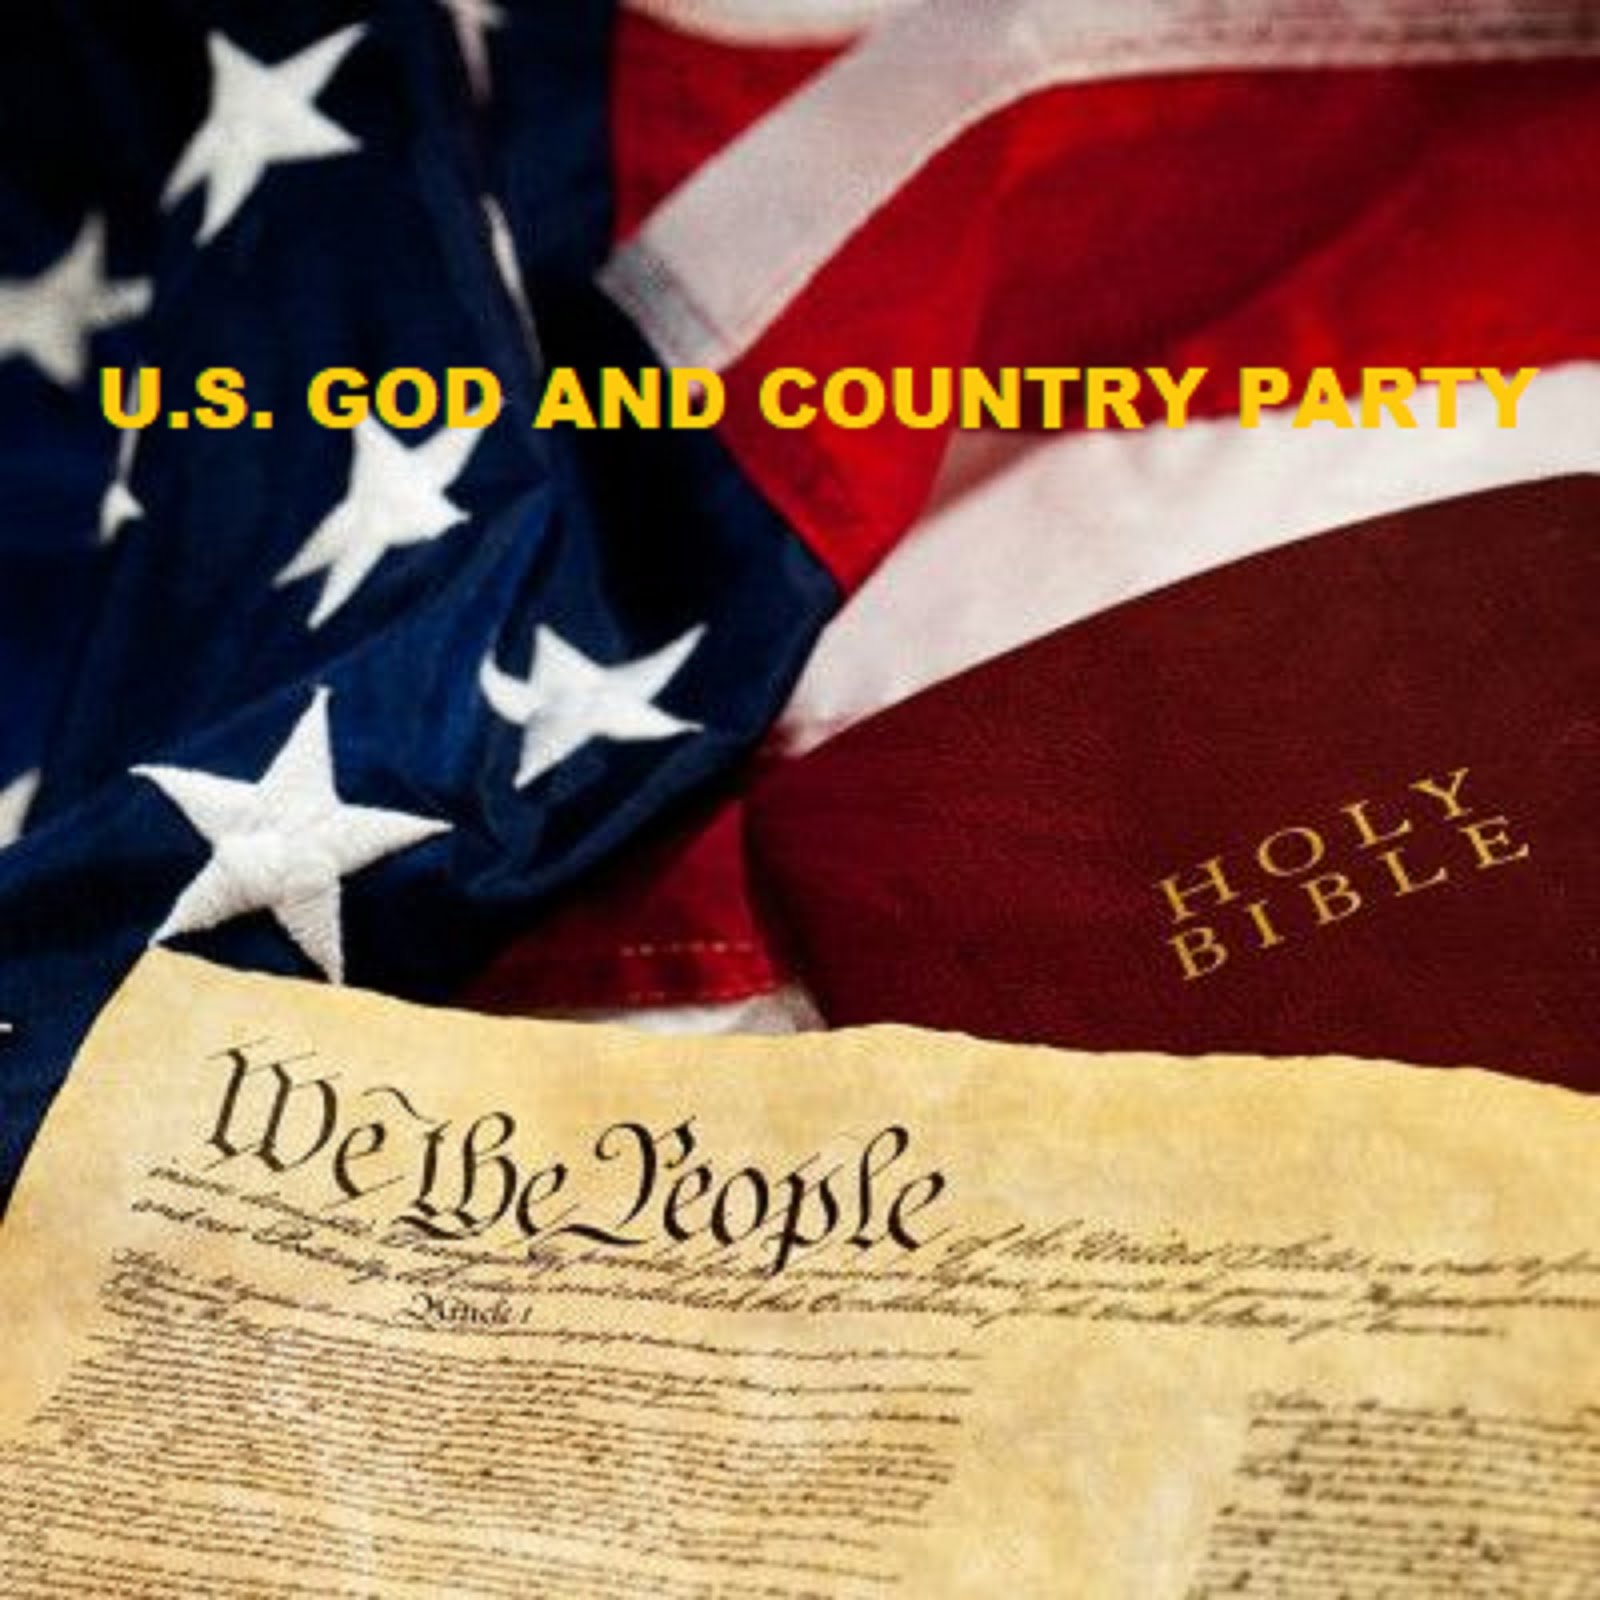  U.S. GOD AND COUNTRY PARTY